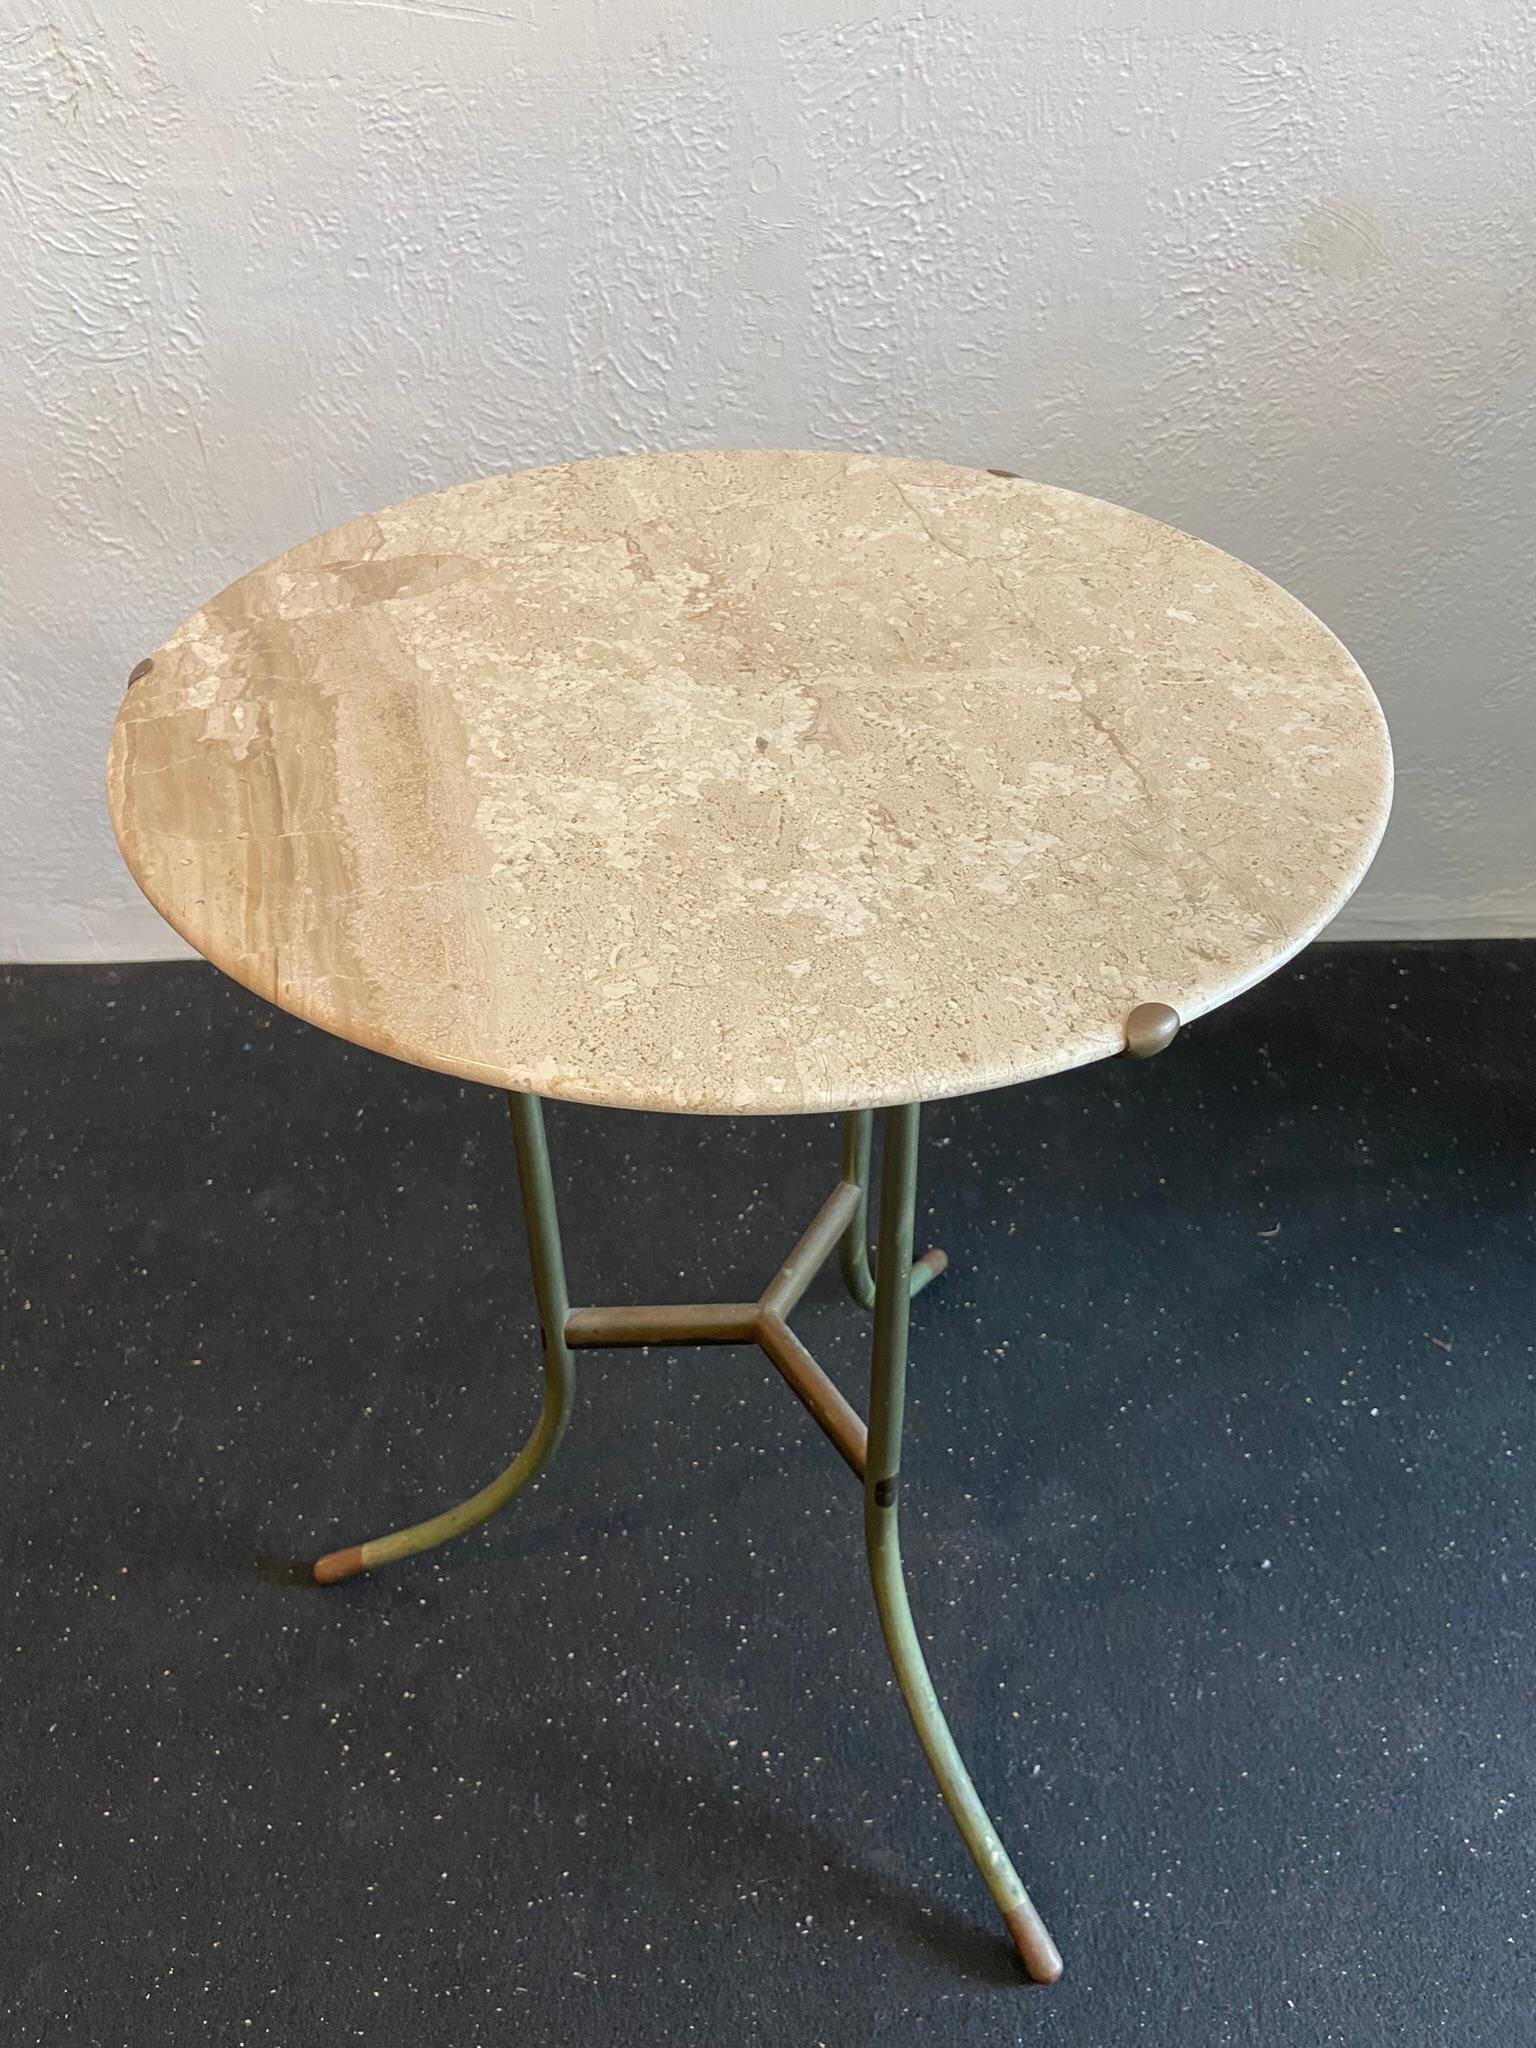 Early Cedric Hartman marble and mixed metal “AE” table. Signed. Beautiful original patina to the base, unpolished. Edges of marble top are free of any chips (please refer to photos). 

Would work well in a variety of interiors such as modern, mid